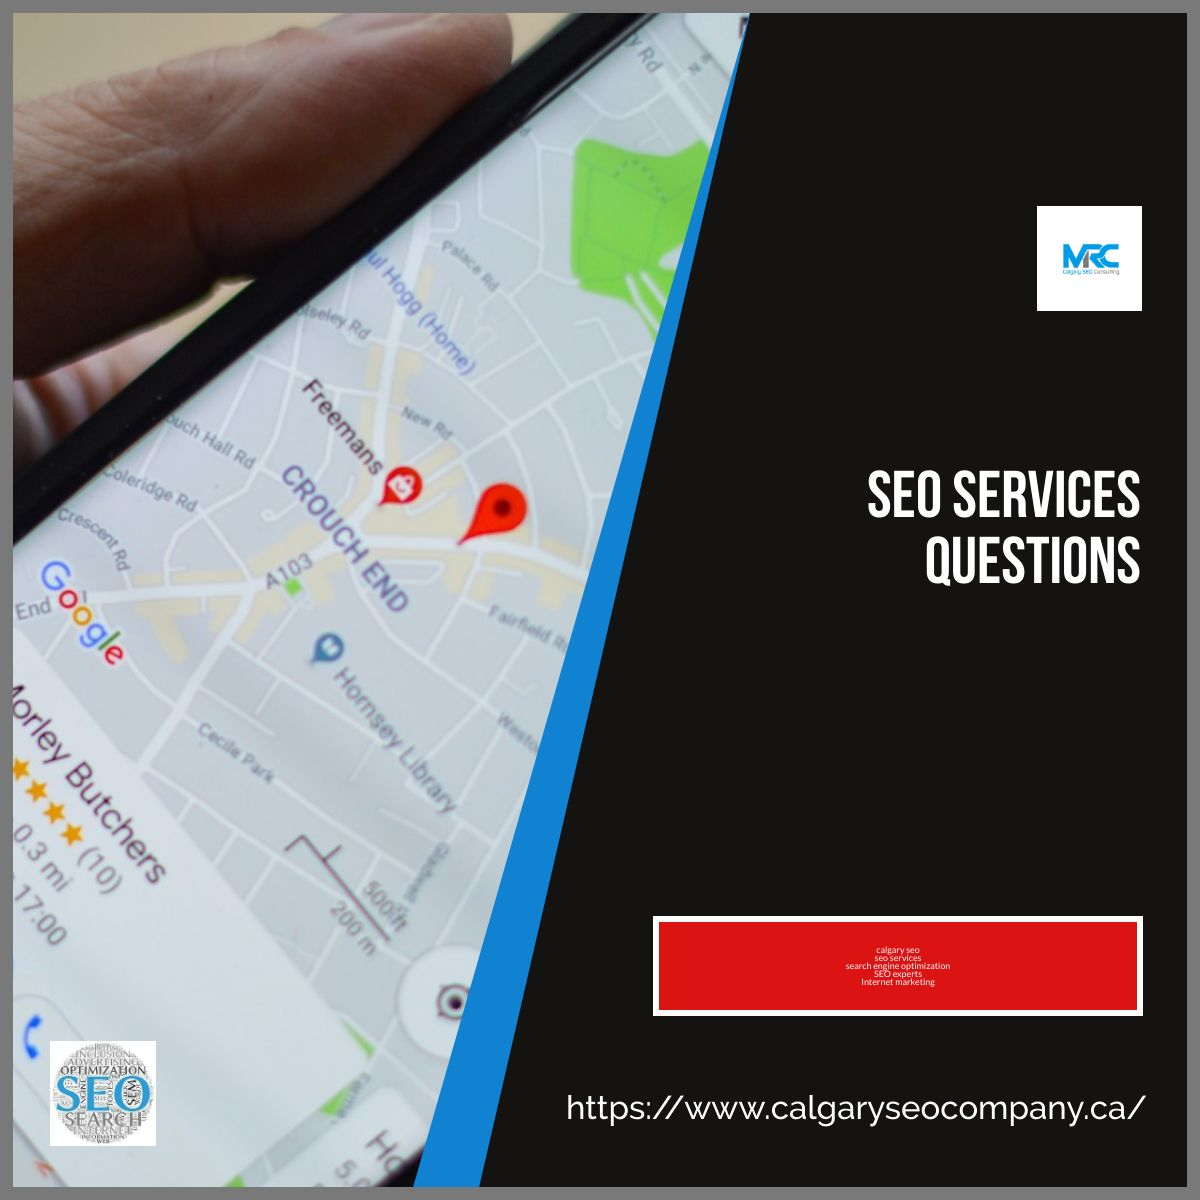 SEO Services Frequently Asked Questions